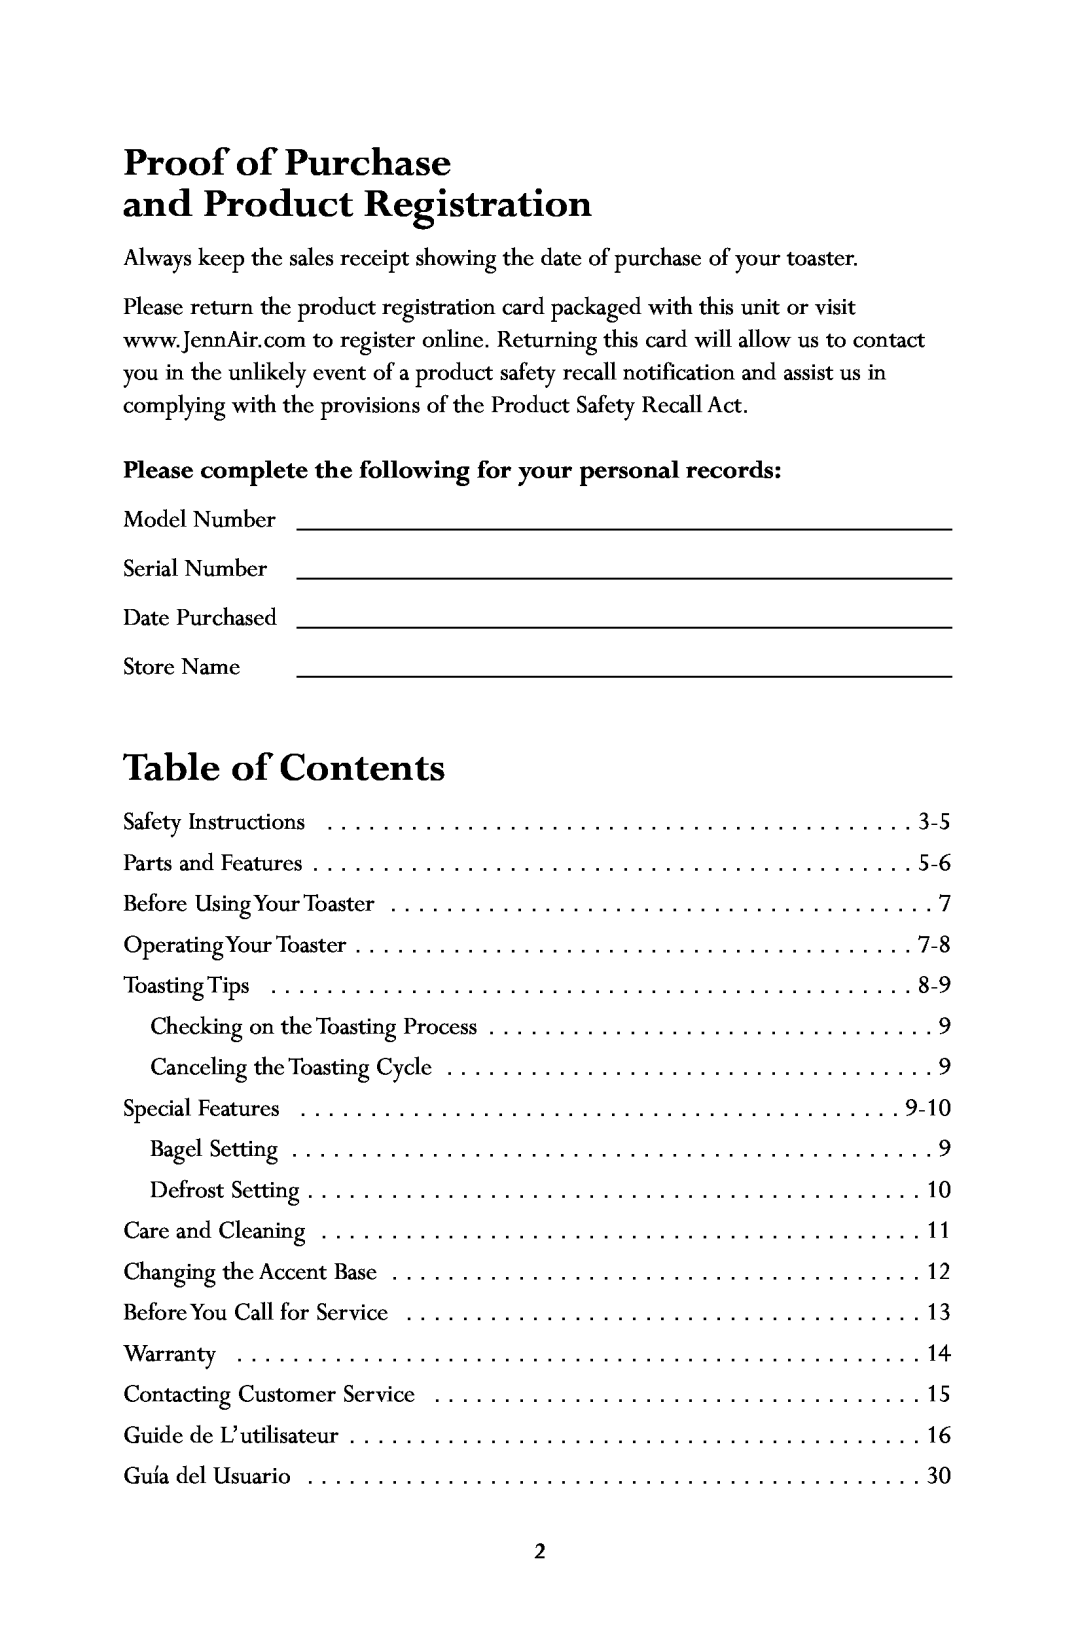 Jenn-Air JTO500 manual Proof of Purchase and Product Registration, Table of Contents 